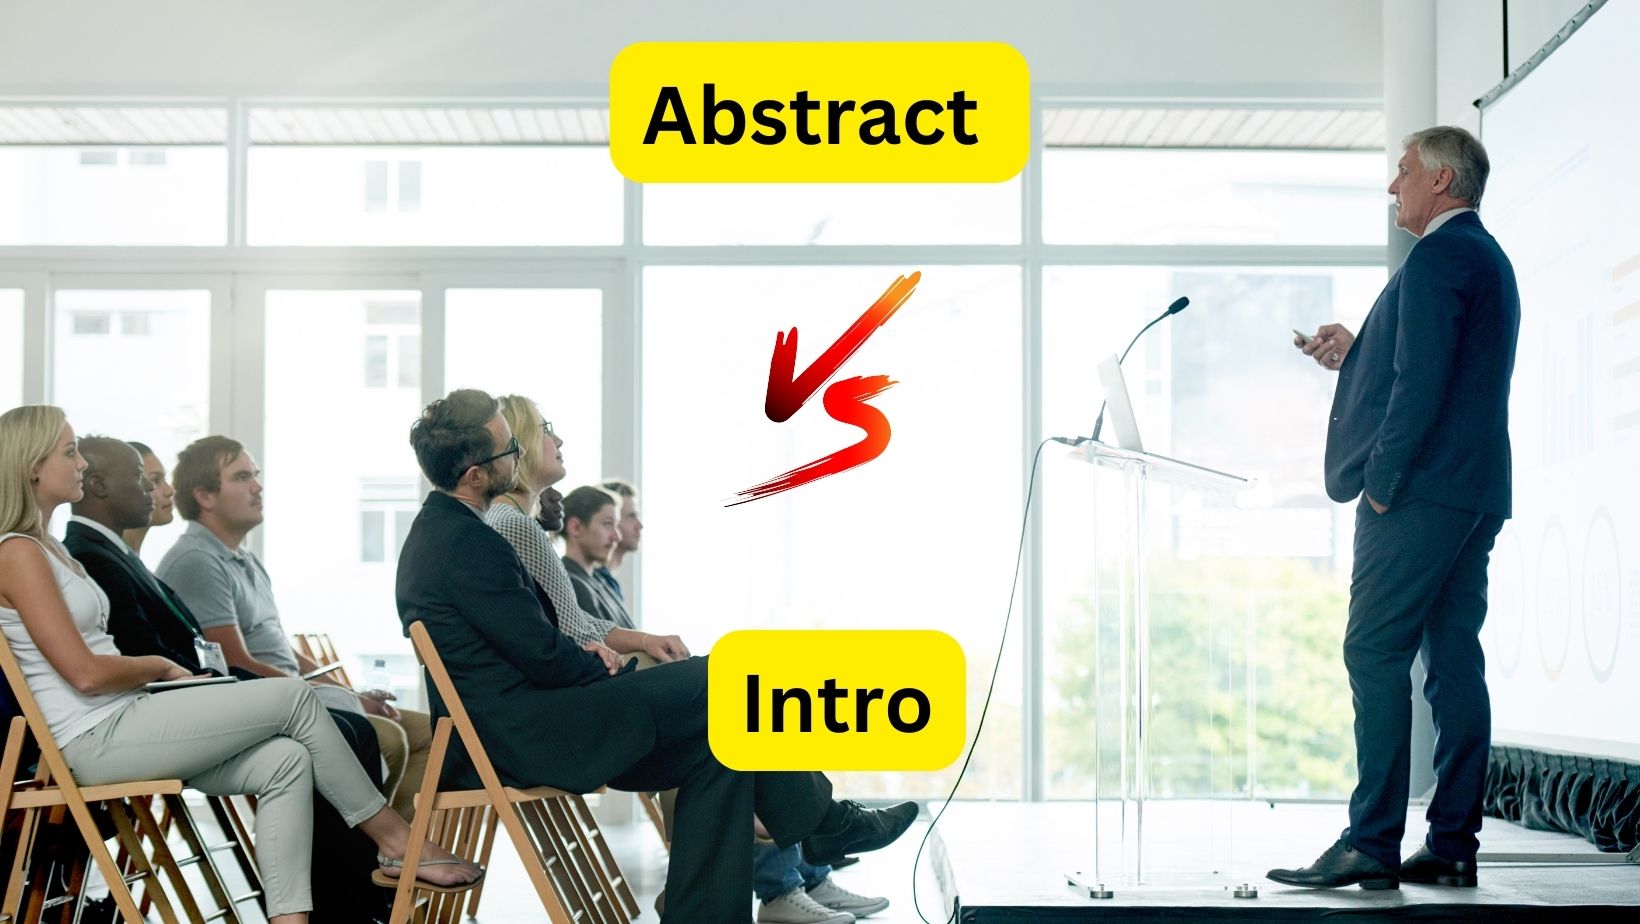 Abstract and Introduction